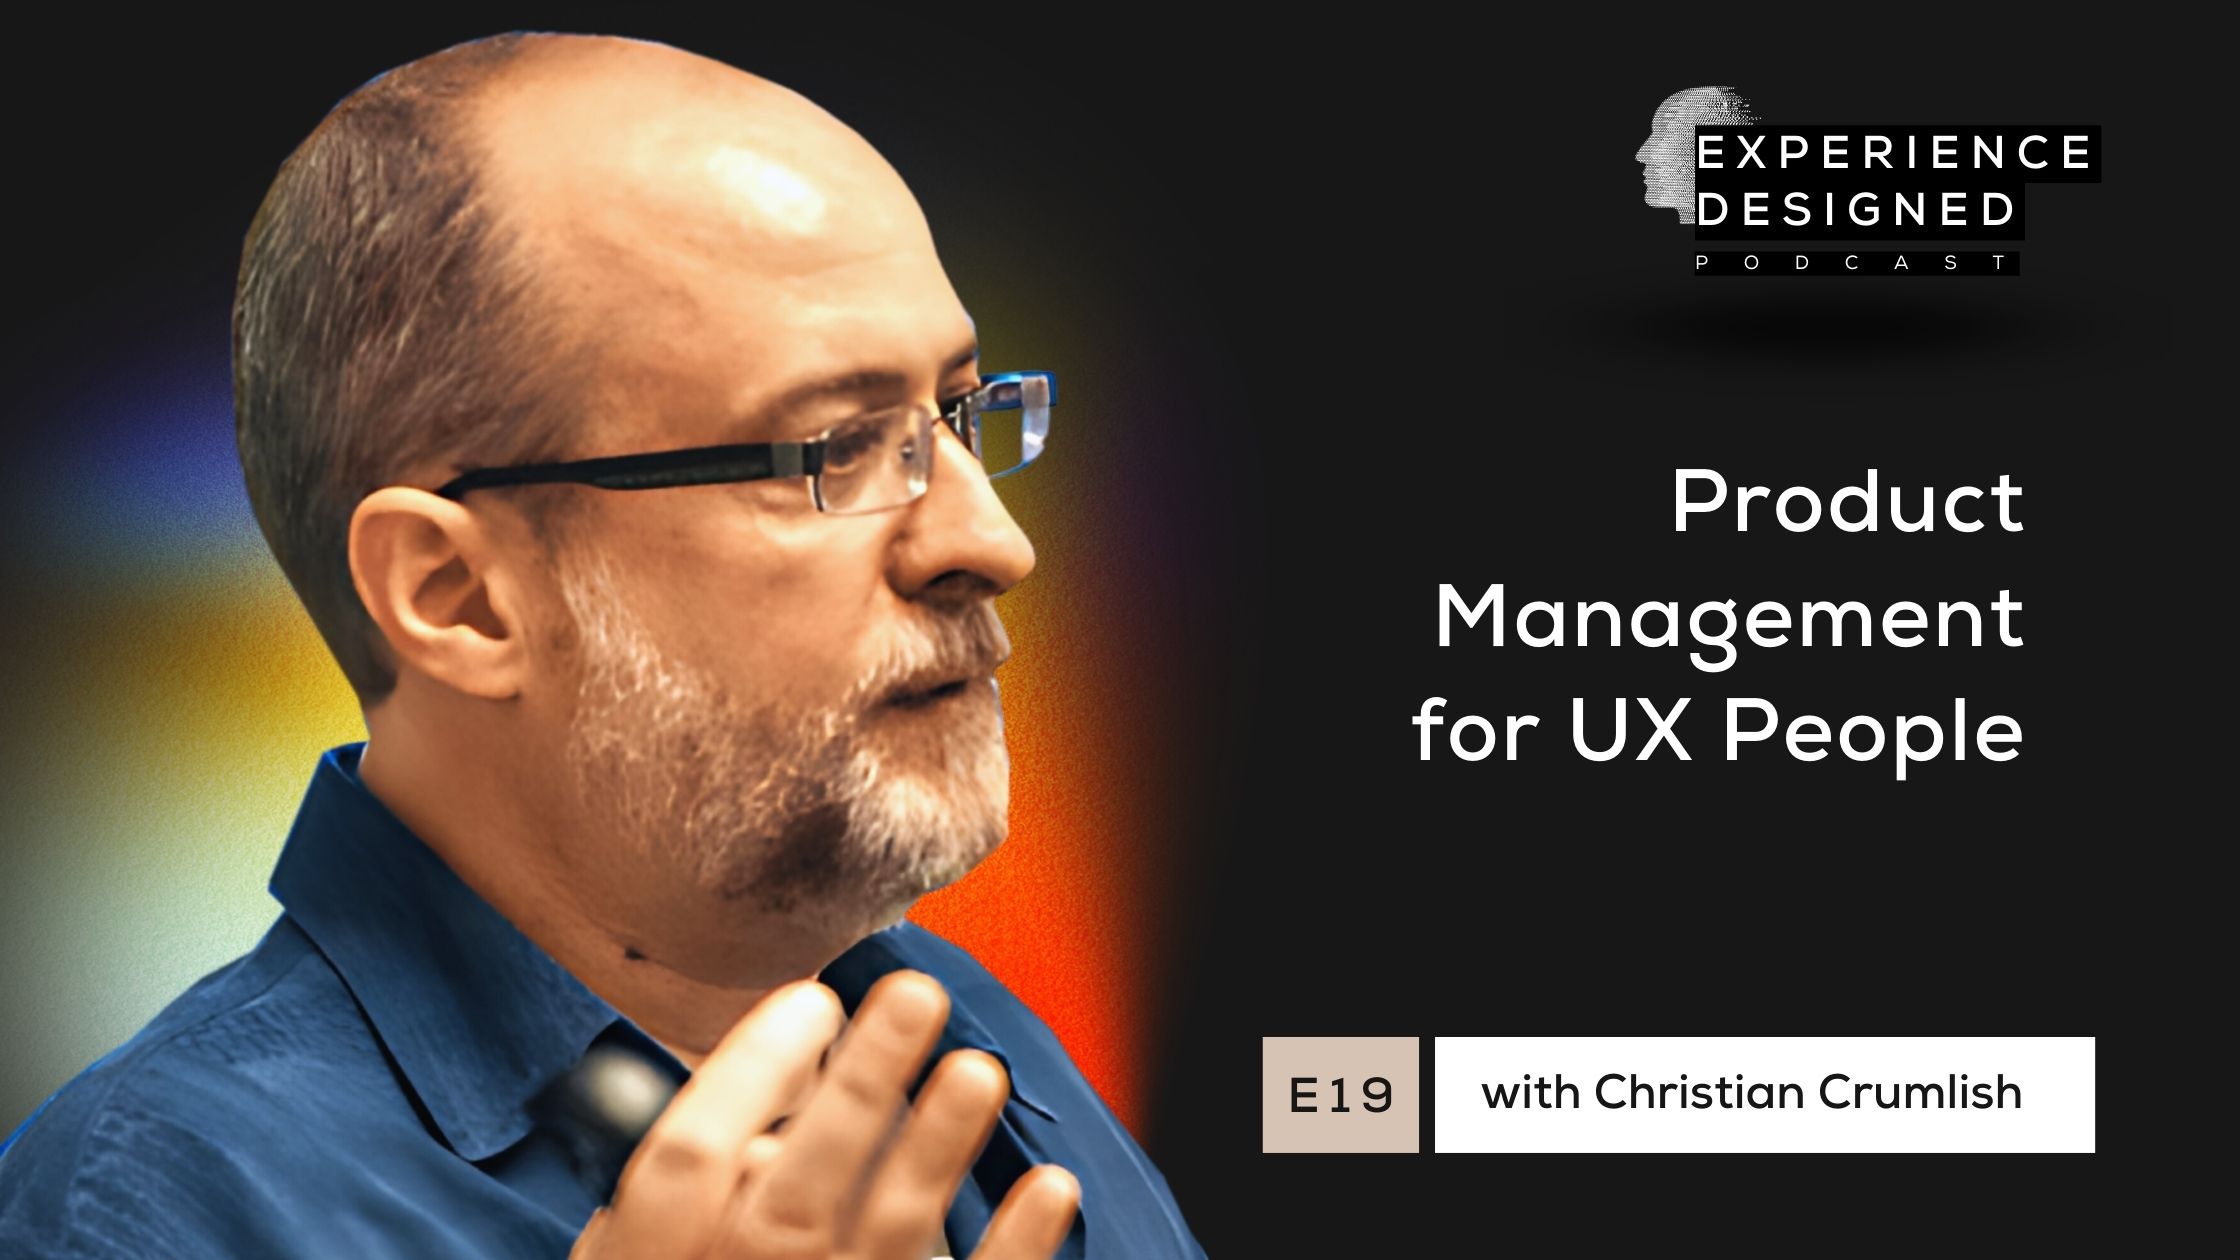 Christian Crumlish is a UXer turned product management leader. He's also an author of the Product Management for UX People book and a host of Design in Product community and conferences on the same topic.